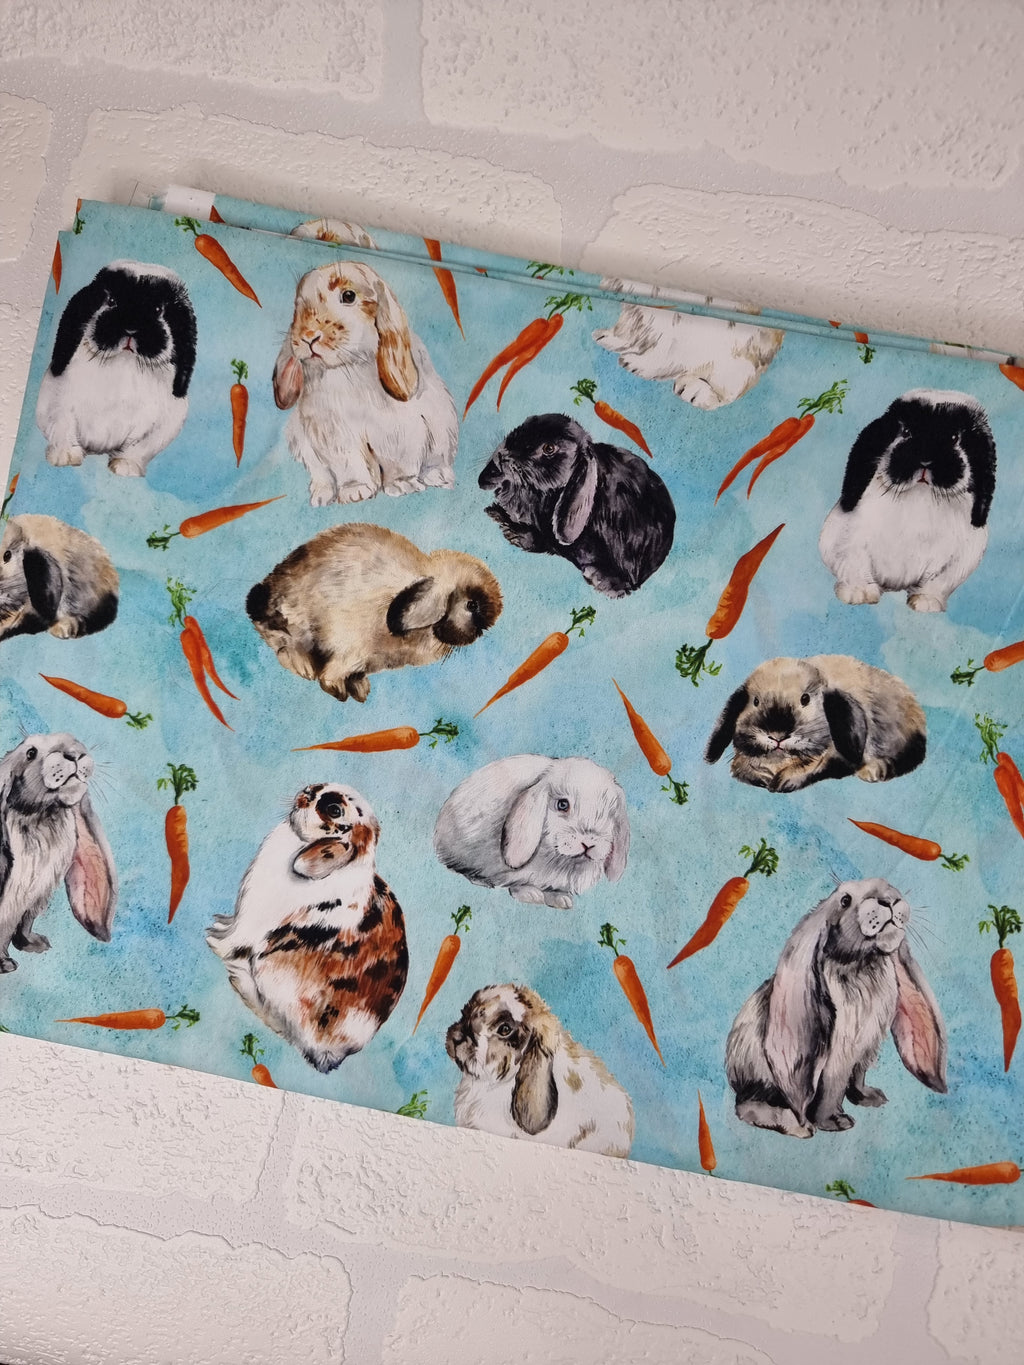 Adorable realistic rabbit breeds on a cloudy blue background. Digitally printed onto cotton poplin